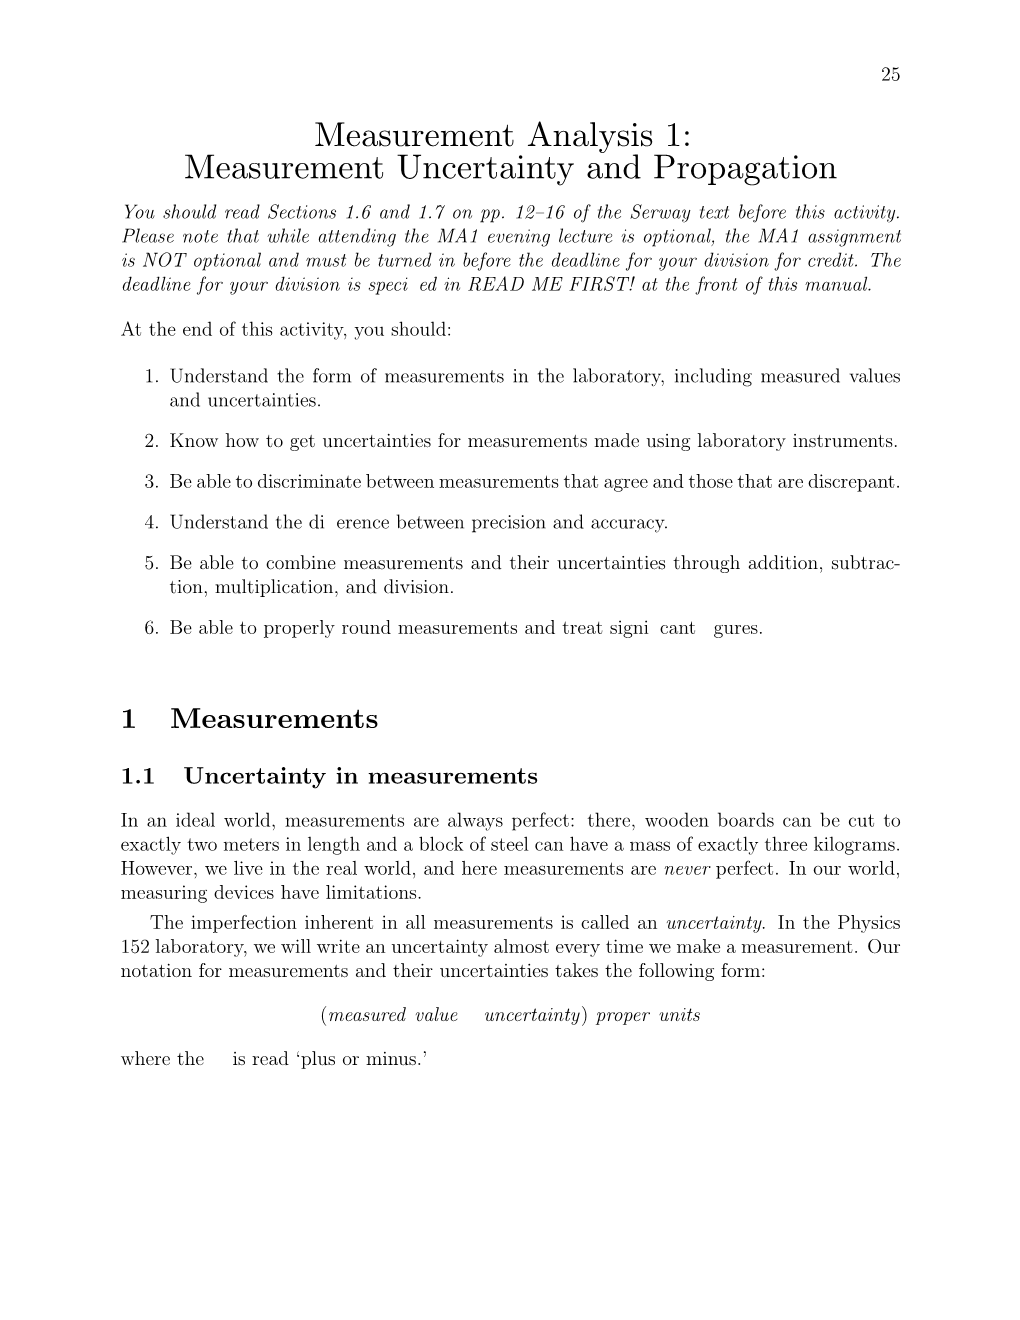 Measurement Uncertainty and Propagation You Should Read Sections 1.6 and 1.7 on Pp